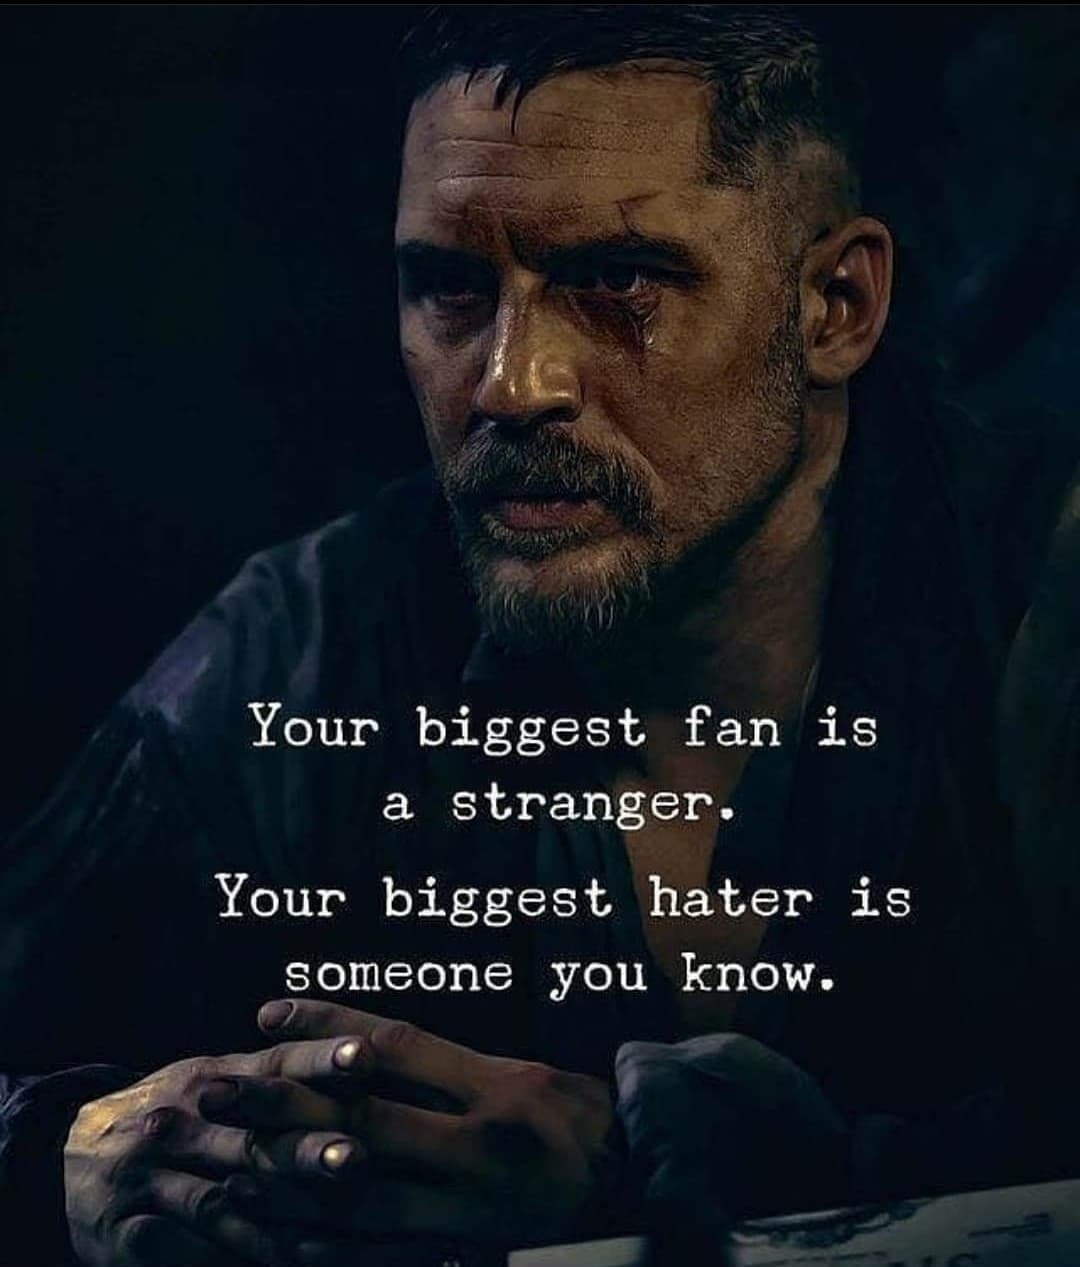 Your biggest fan is a stranger. Your biggest hater is someone you know.